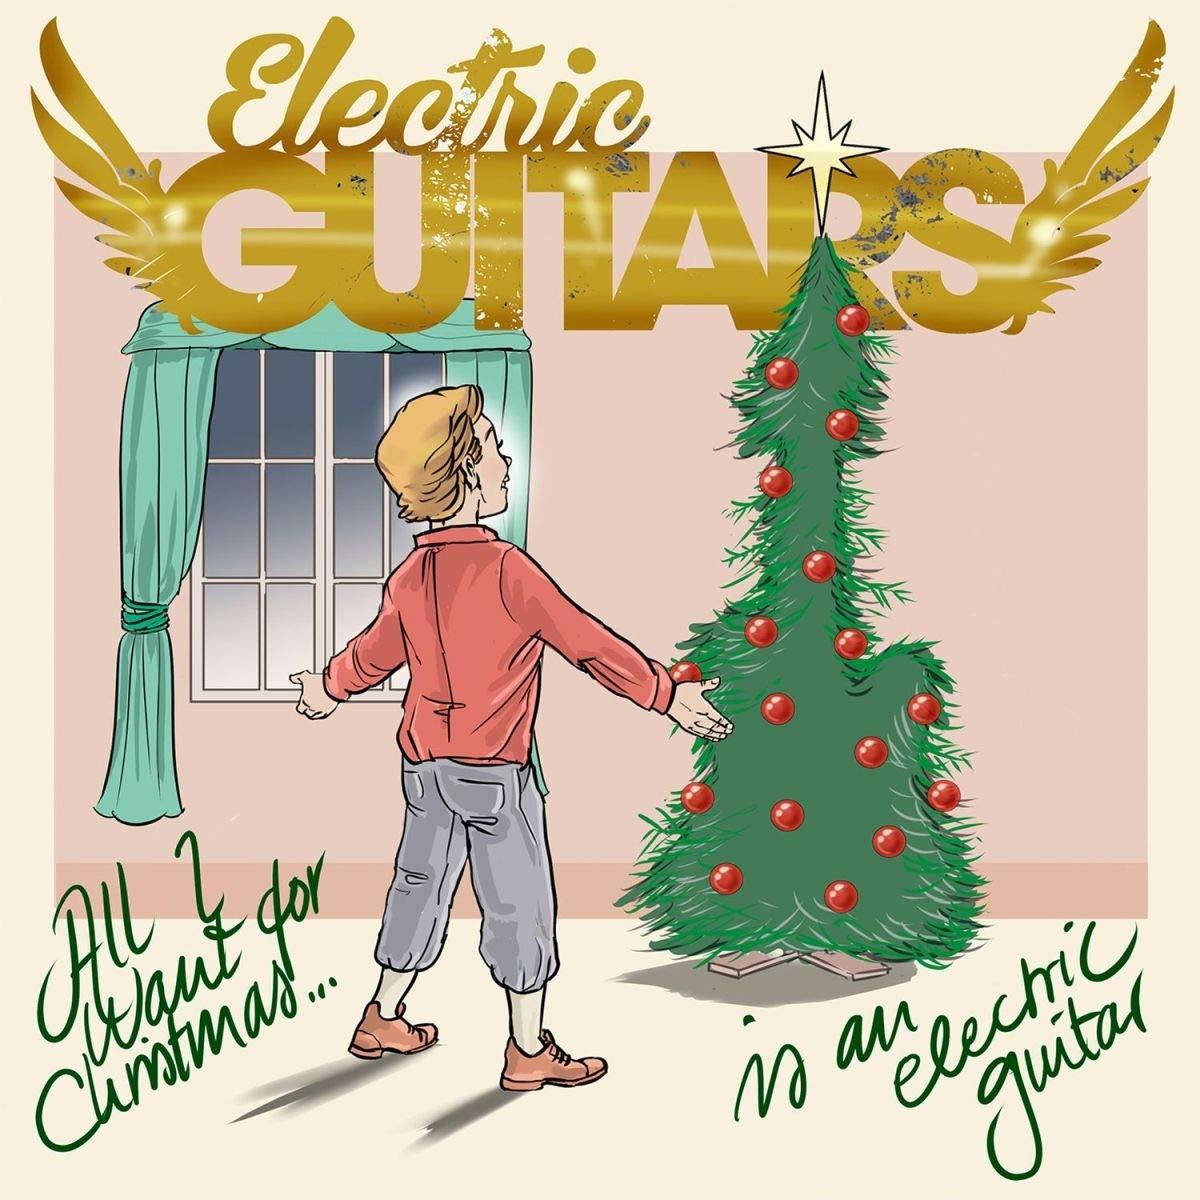 -COLOURED- Electric - (EP WANT.. 7-ALL Guitars - (analog)) I